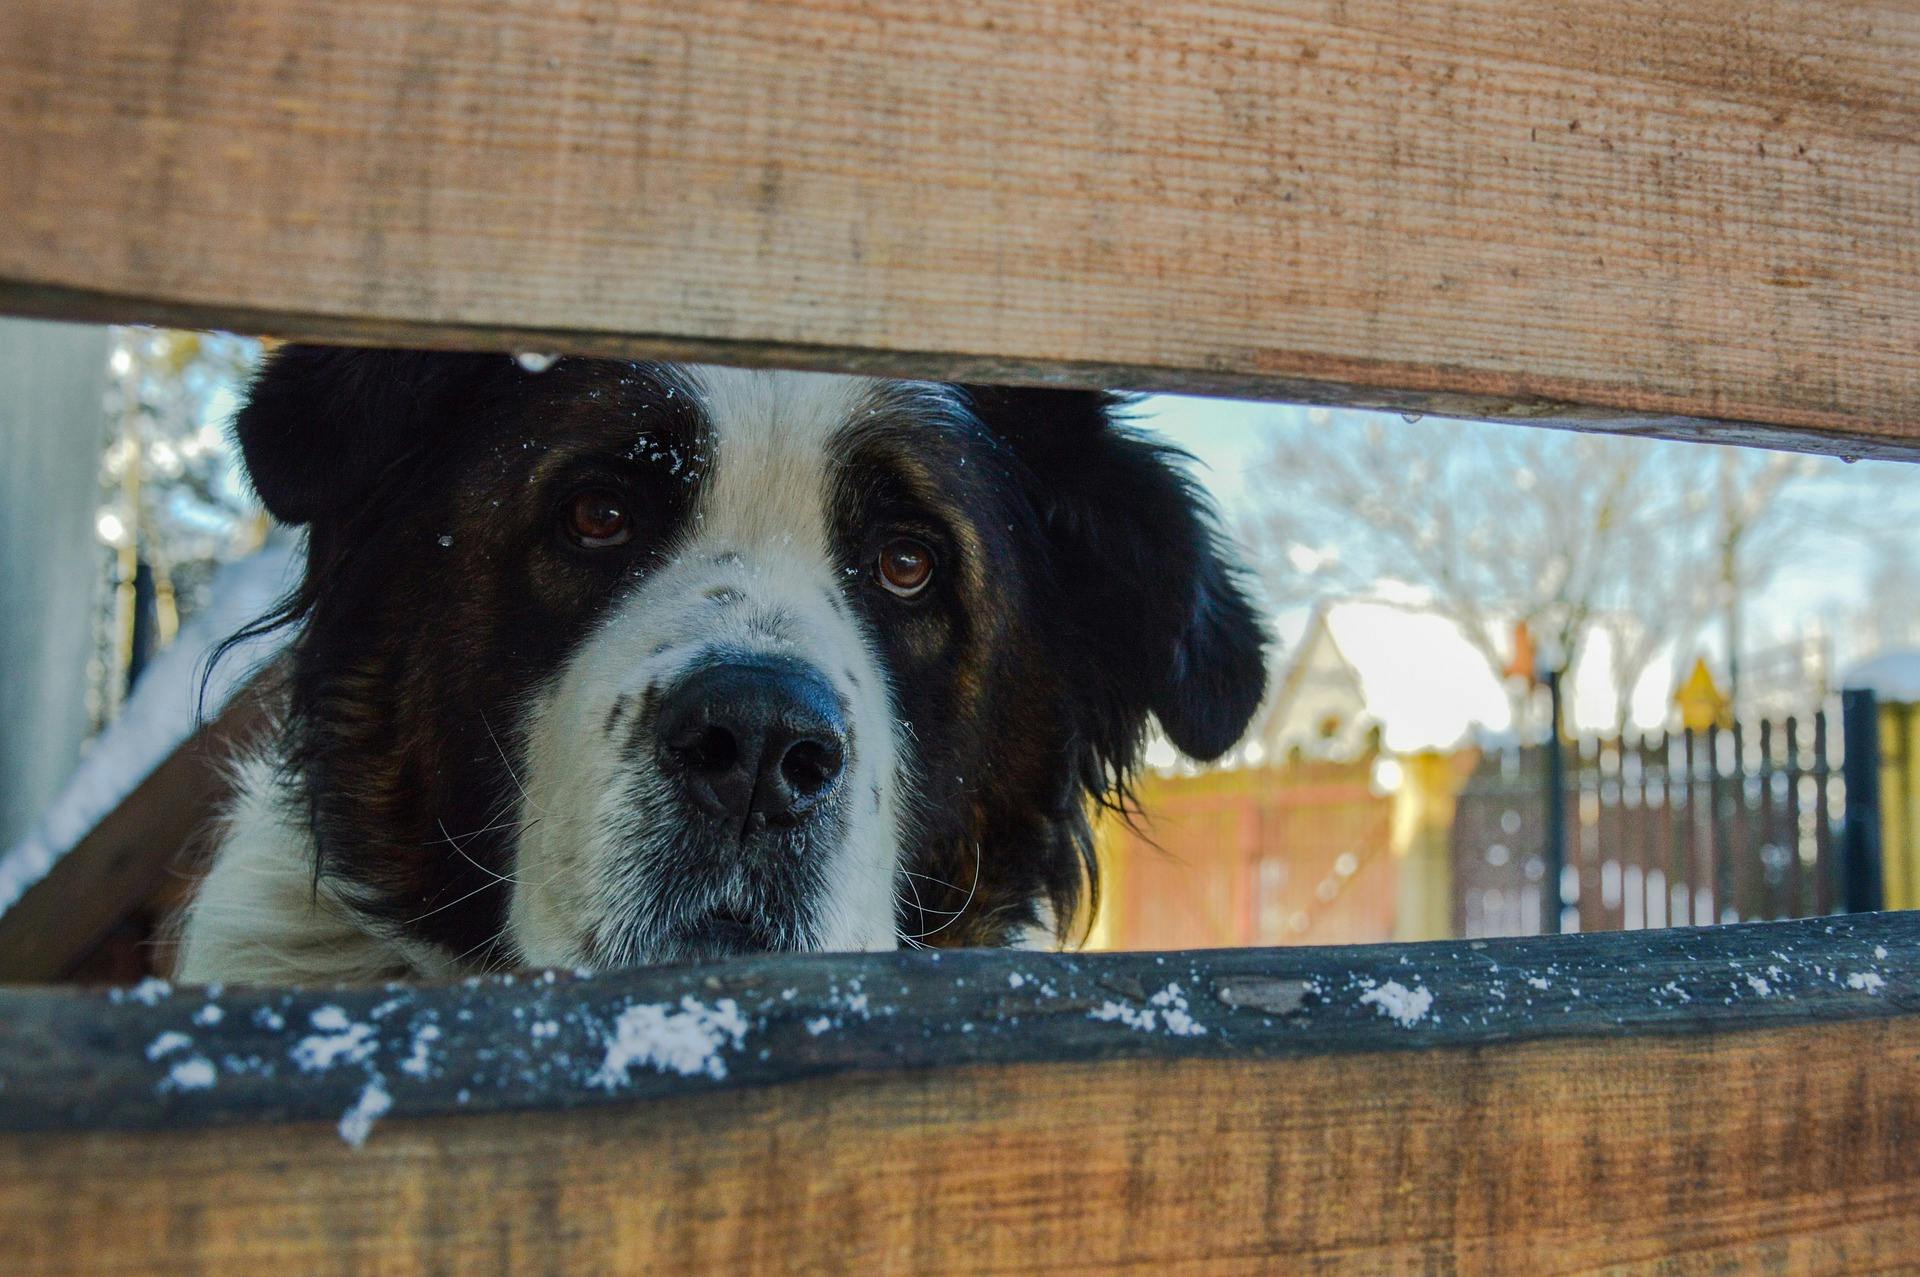 St. Bernard looking through a fence in the snow.